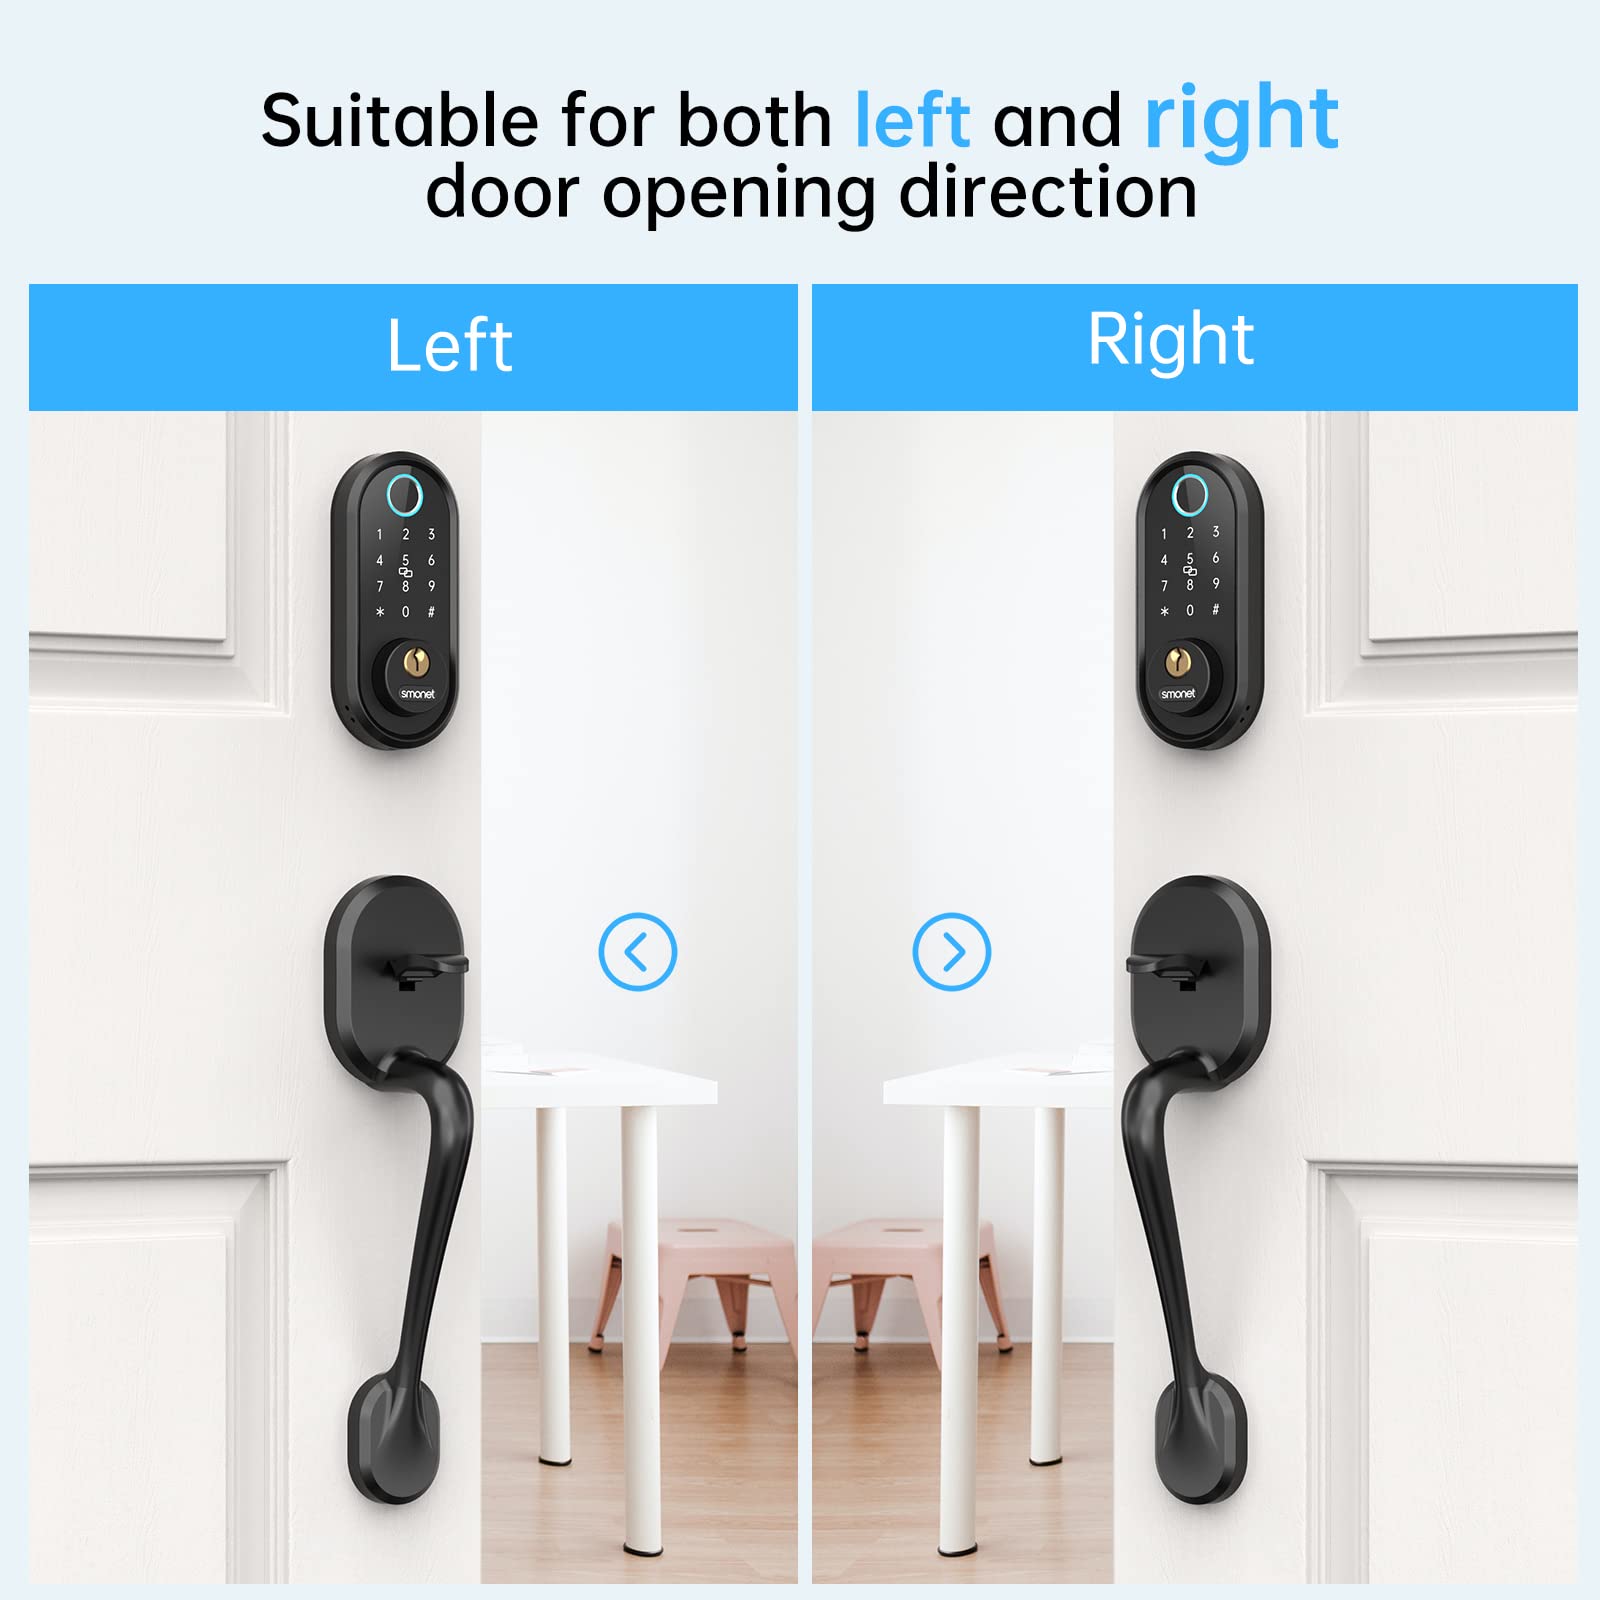 suitable for both left and right door